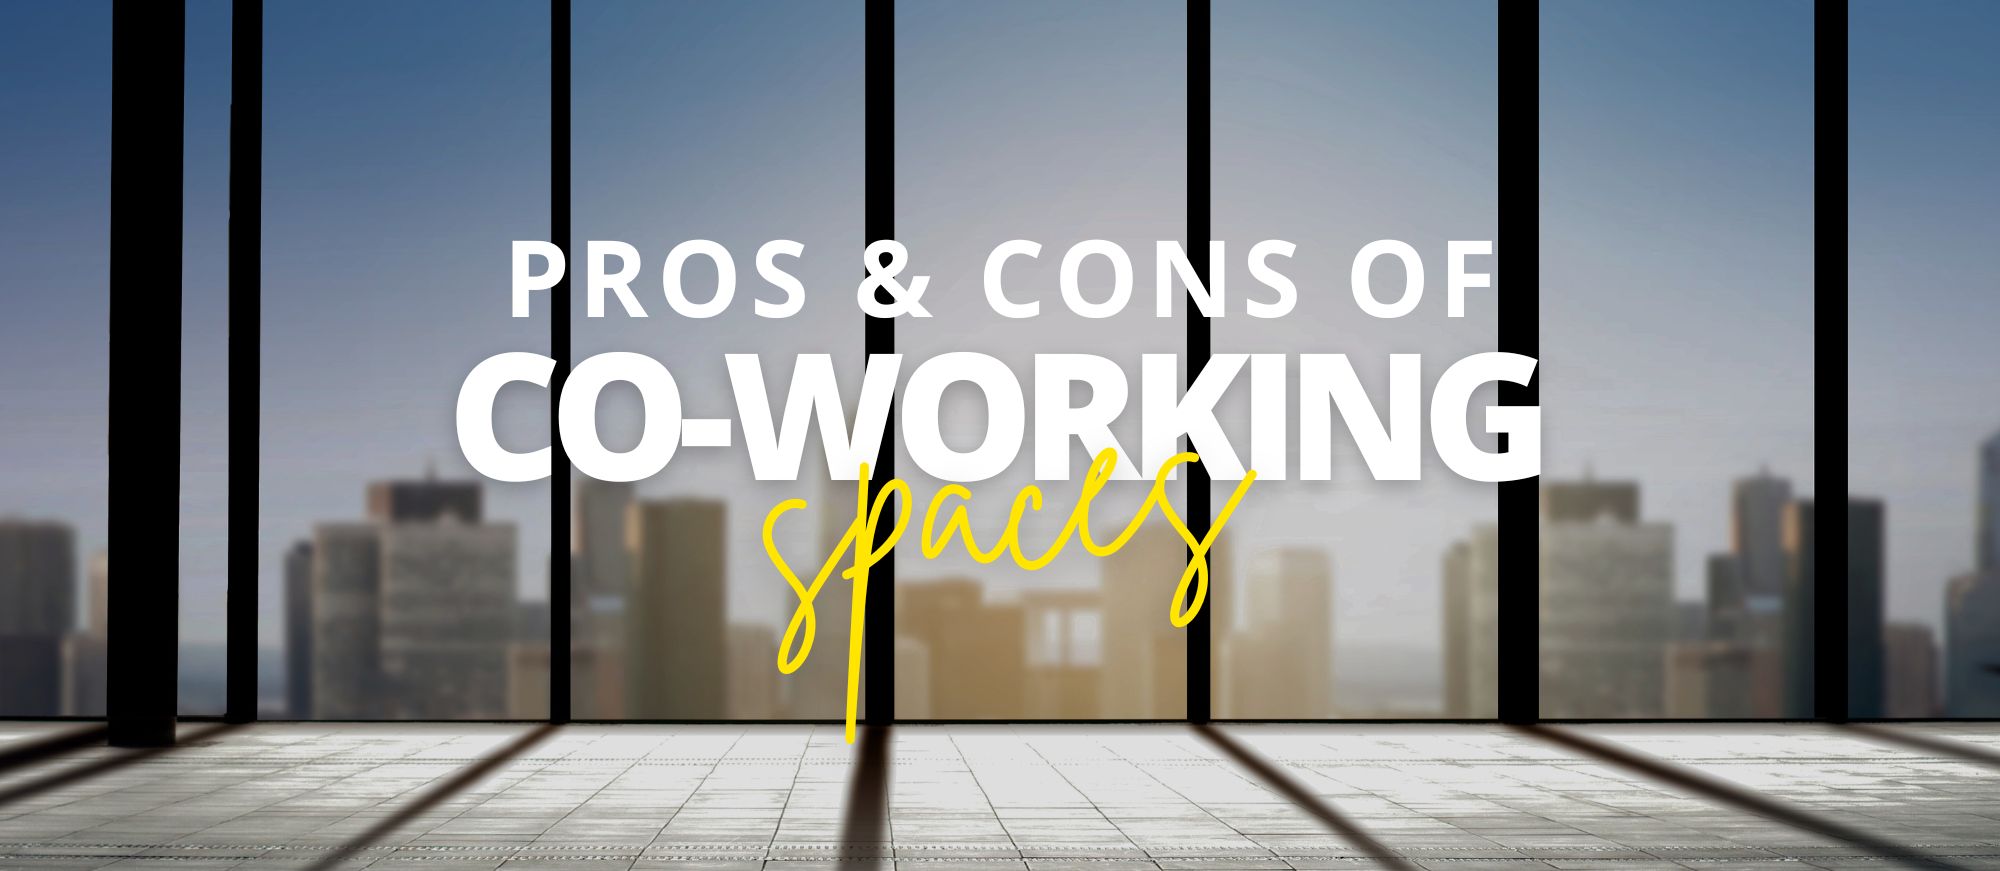 Coworking Spaces Egypt